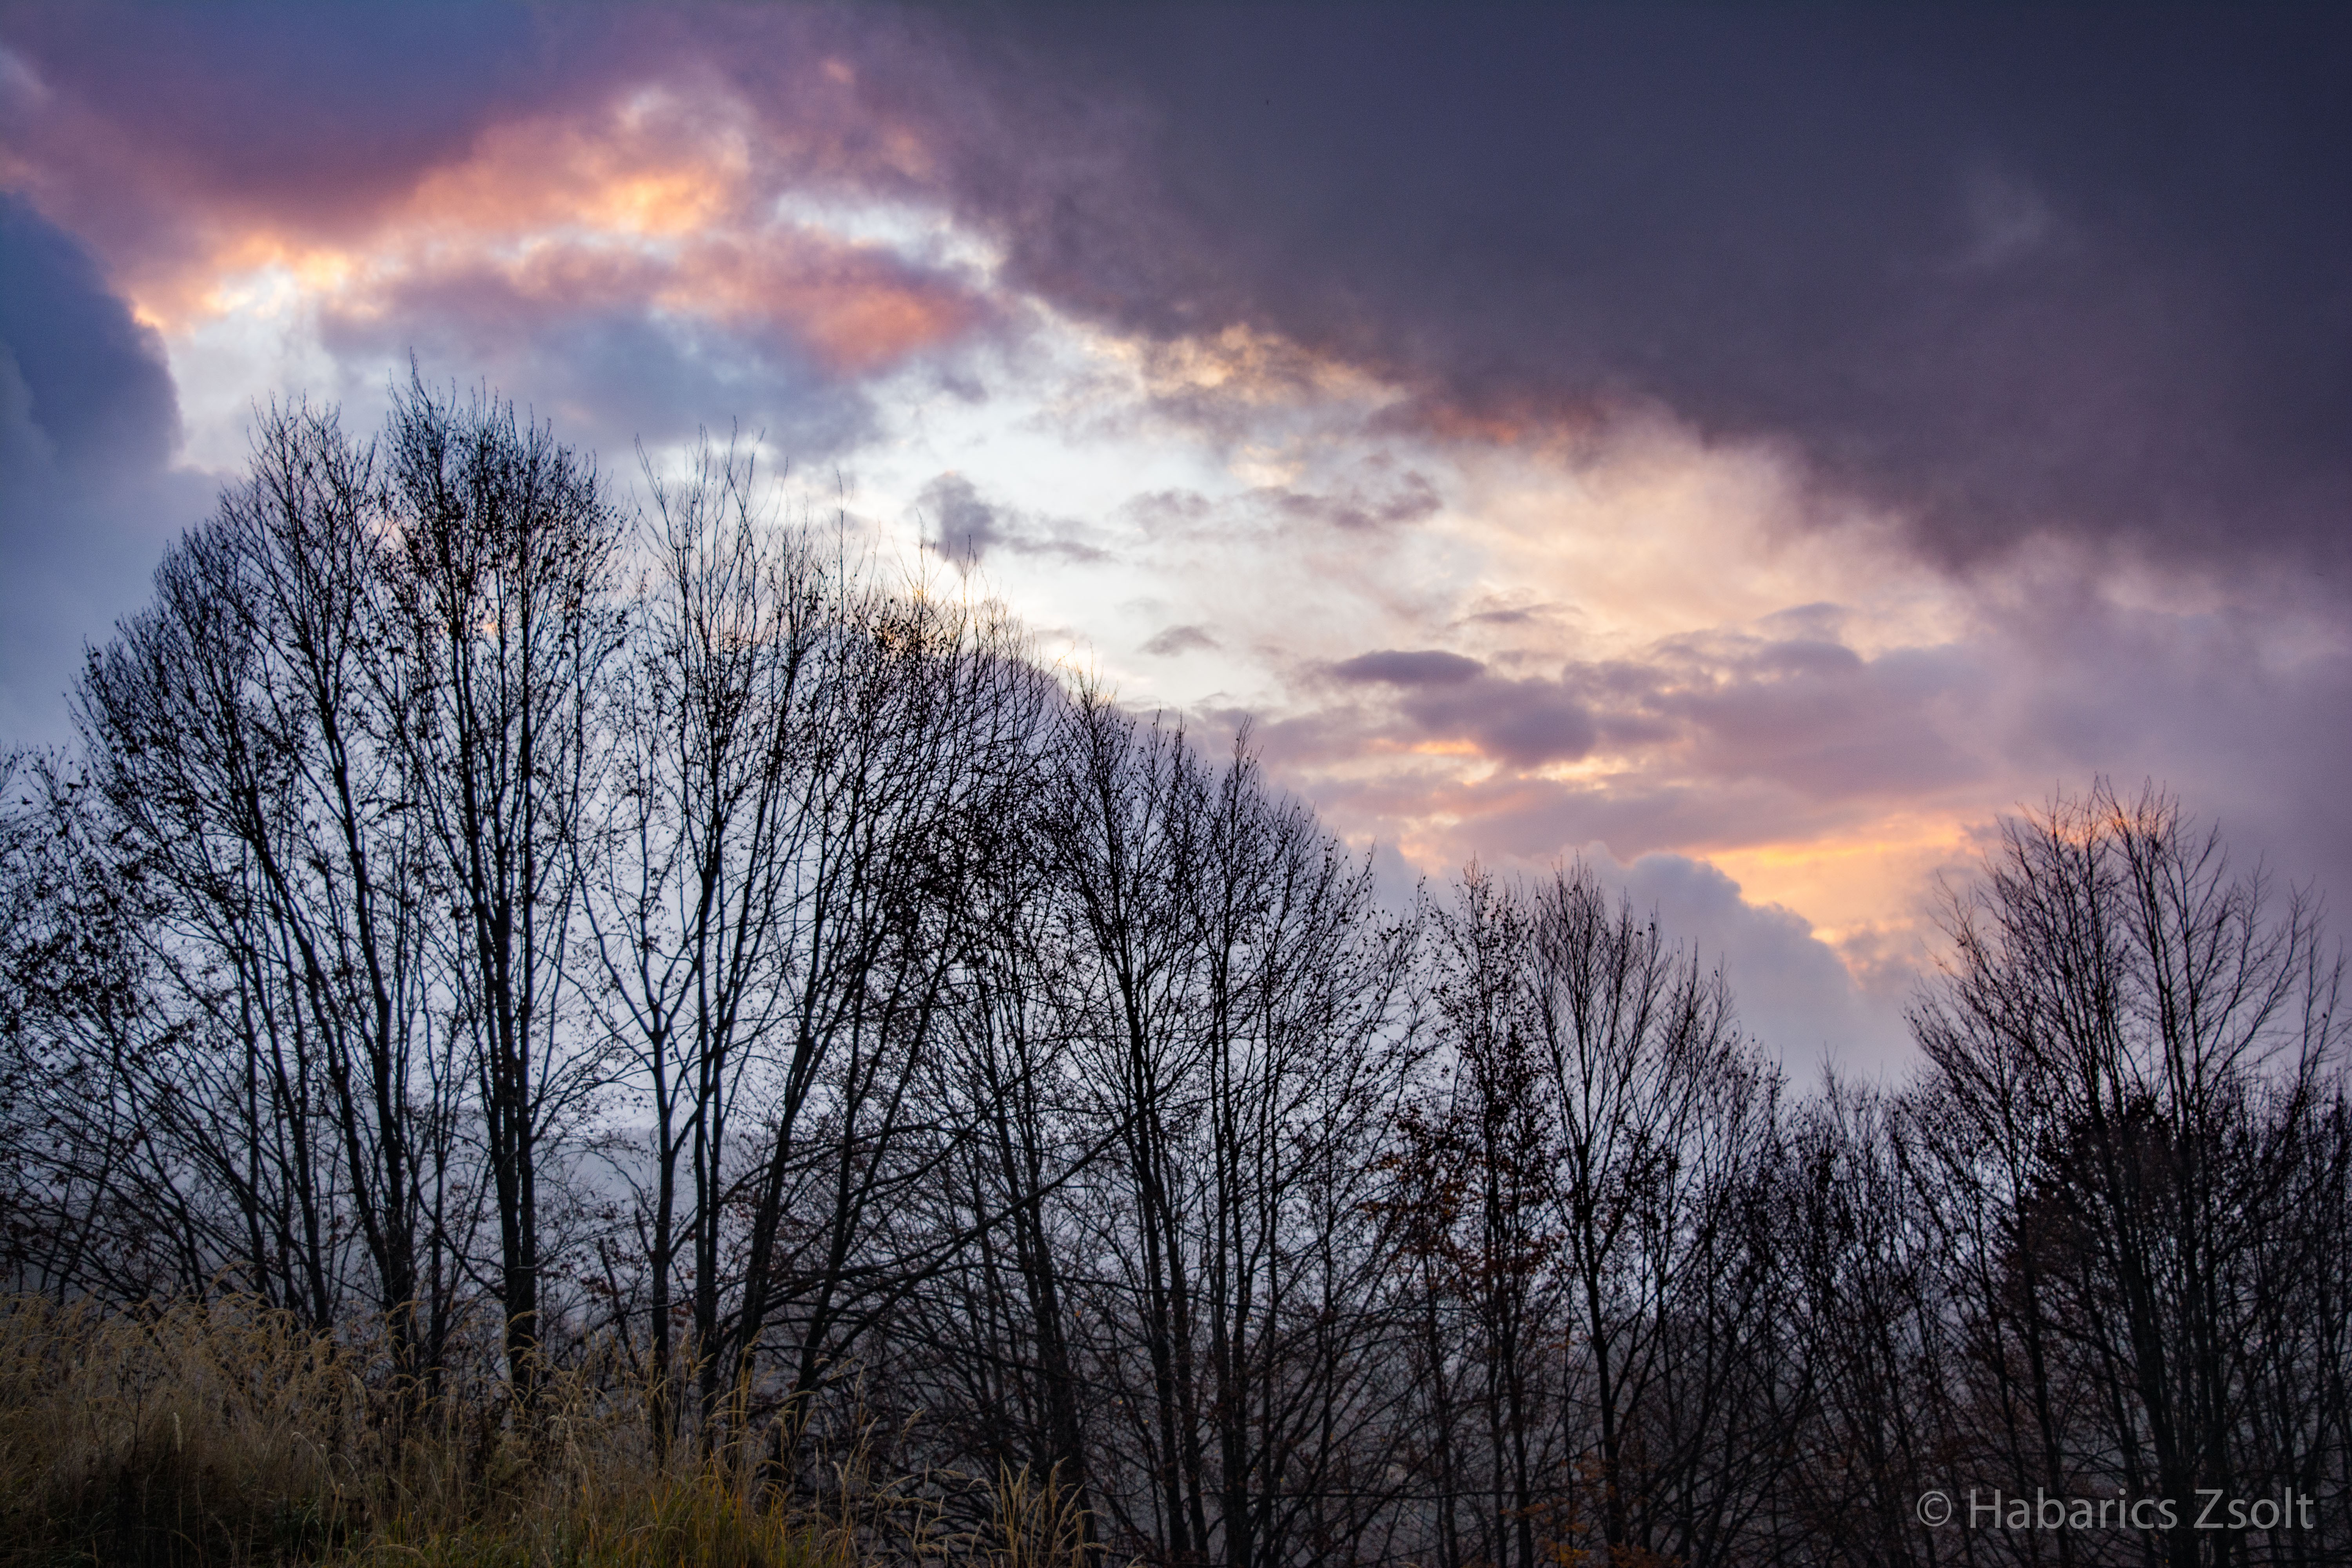 General 6000x4000 trees clouds outdoors fall nature sky